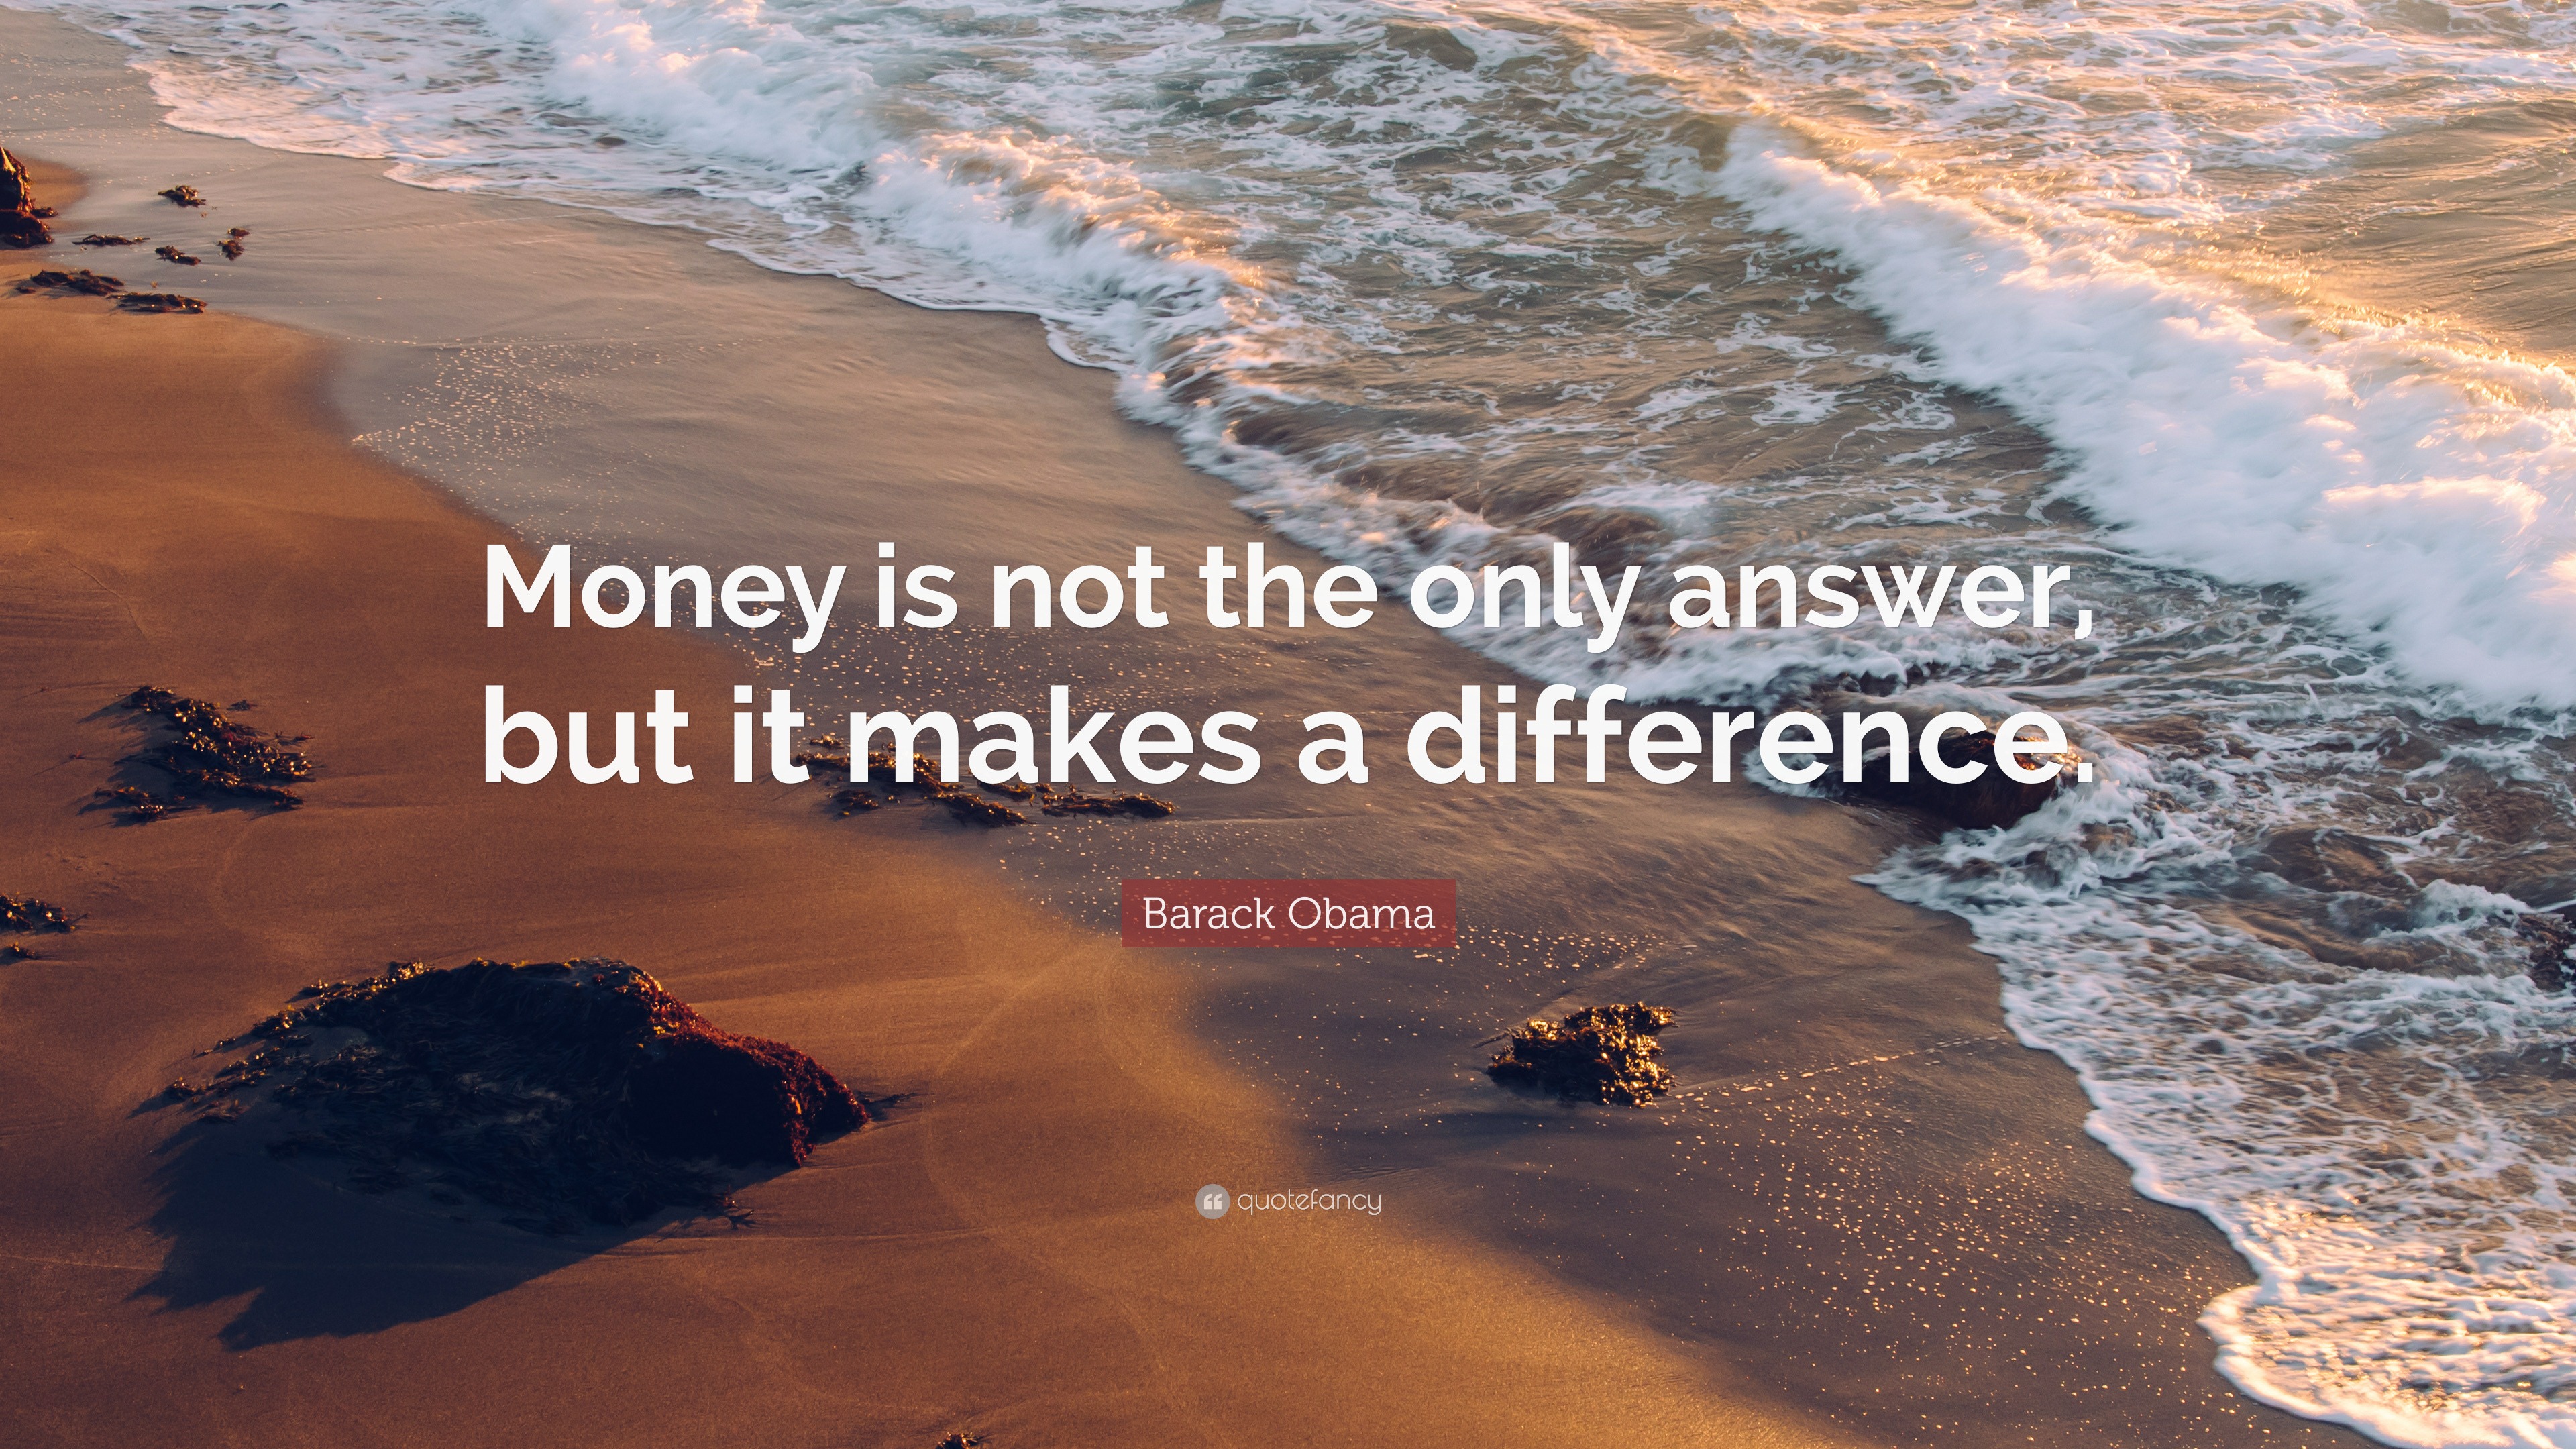 Barack Obama Quote: “Money is not the only answer, but it makes a difference .”